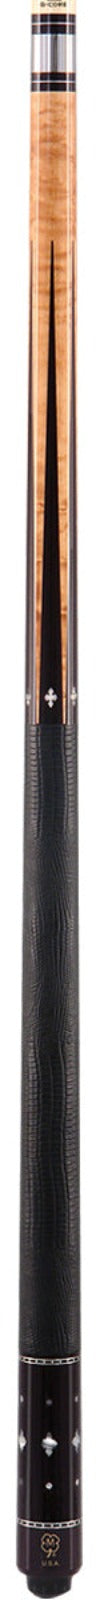 McDermott G502 with G-Core Shaft Pool Cue